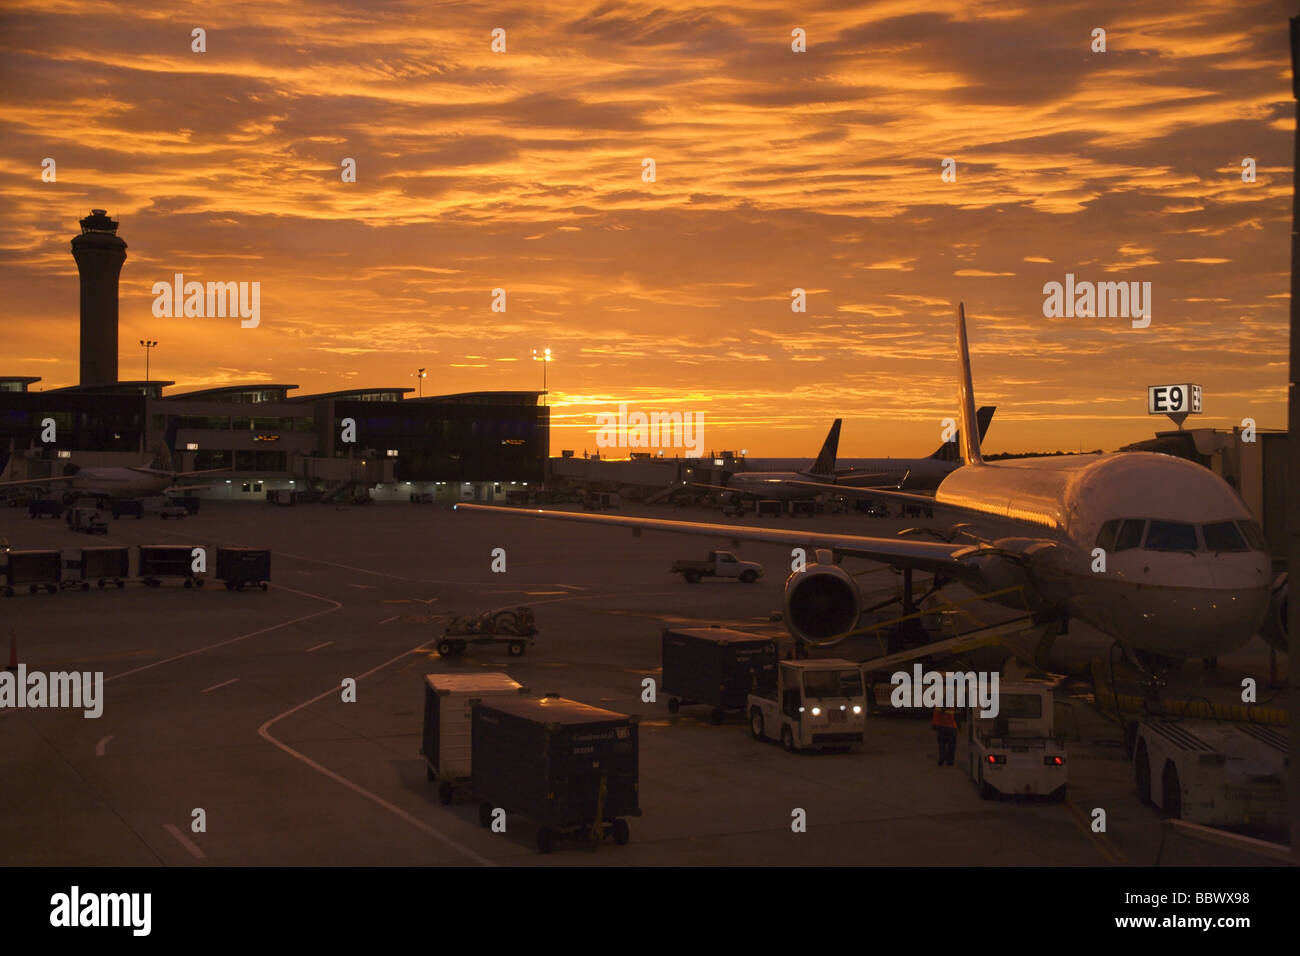 Airliners at terminal, sunrise, Houston International Airport Stock Photo